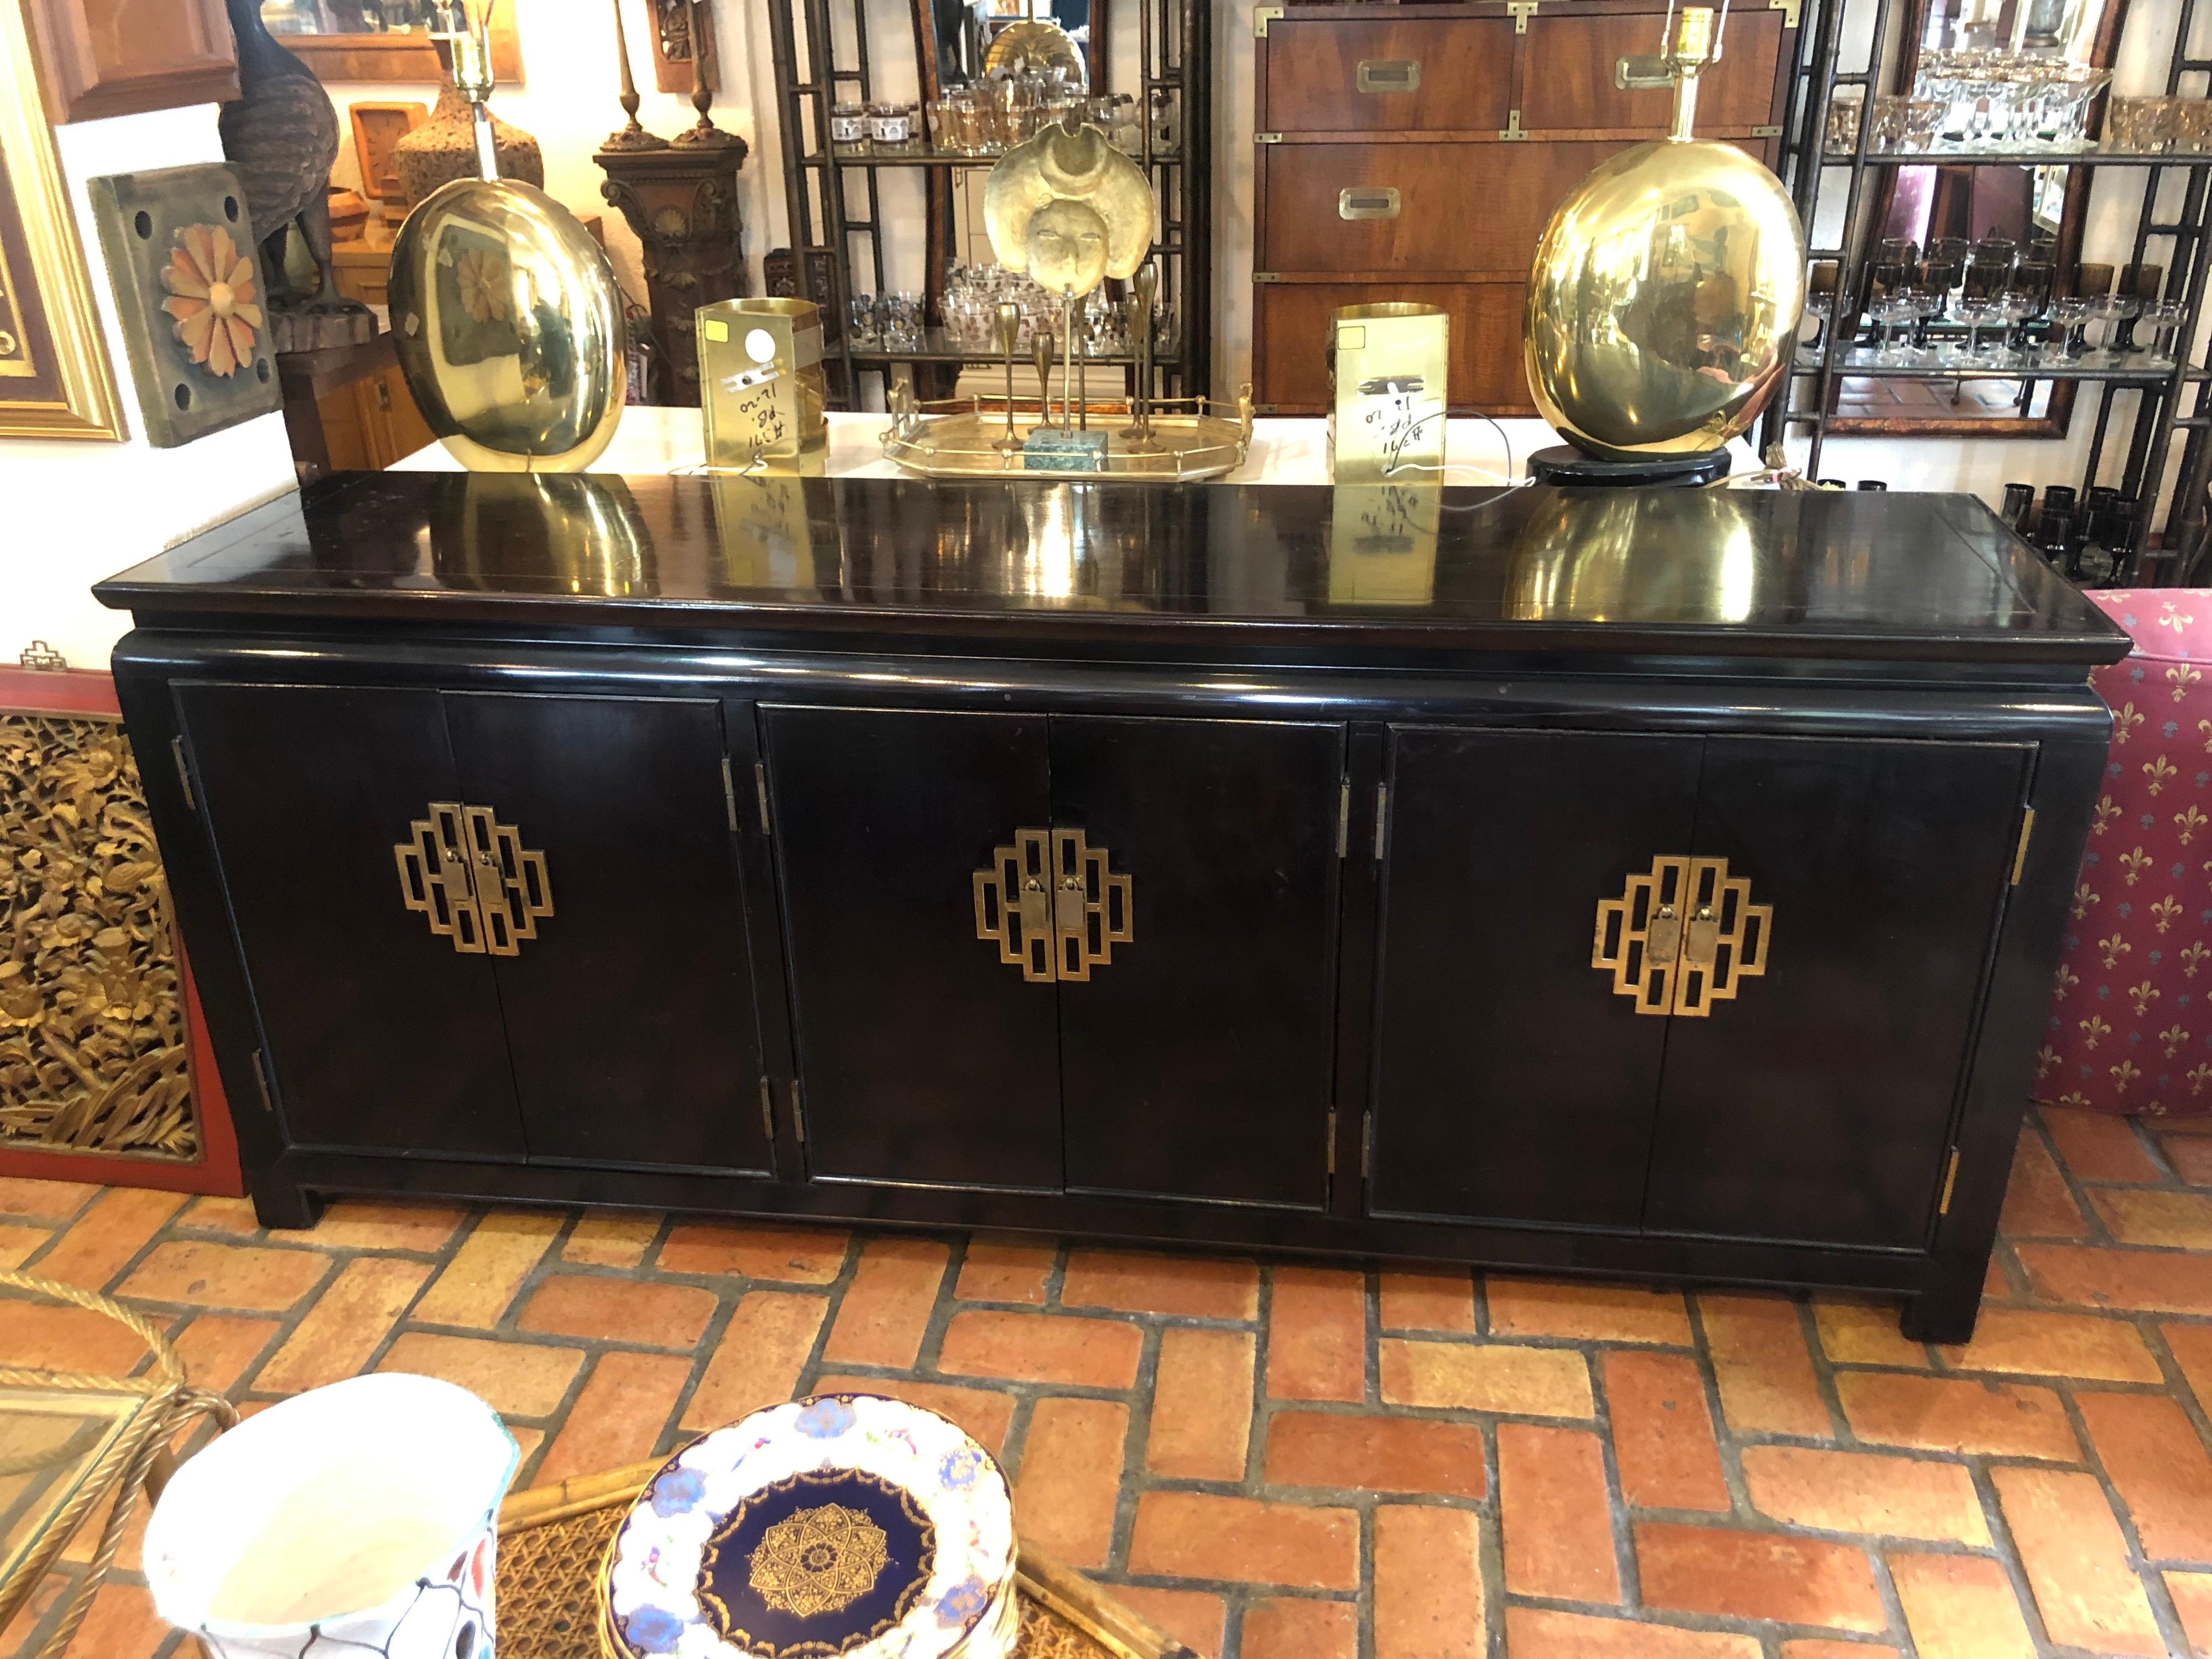 Hollywood Regency Credenza in the style of James Mont. This sophisticated black lacquered beauty by Century would upgrade any room with its presence. Lots of storage and nice heavy brass hardware.